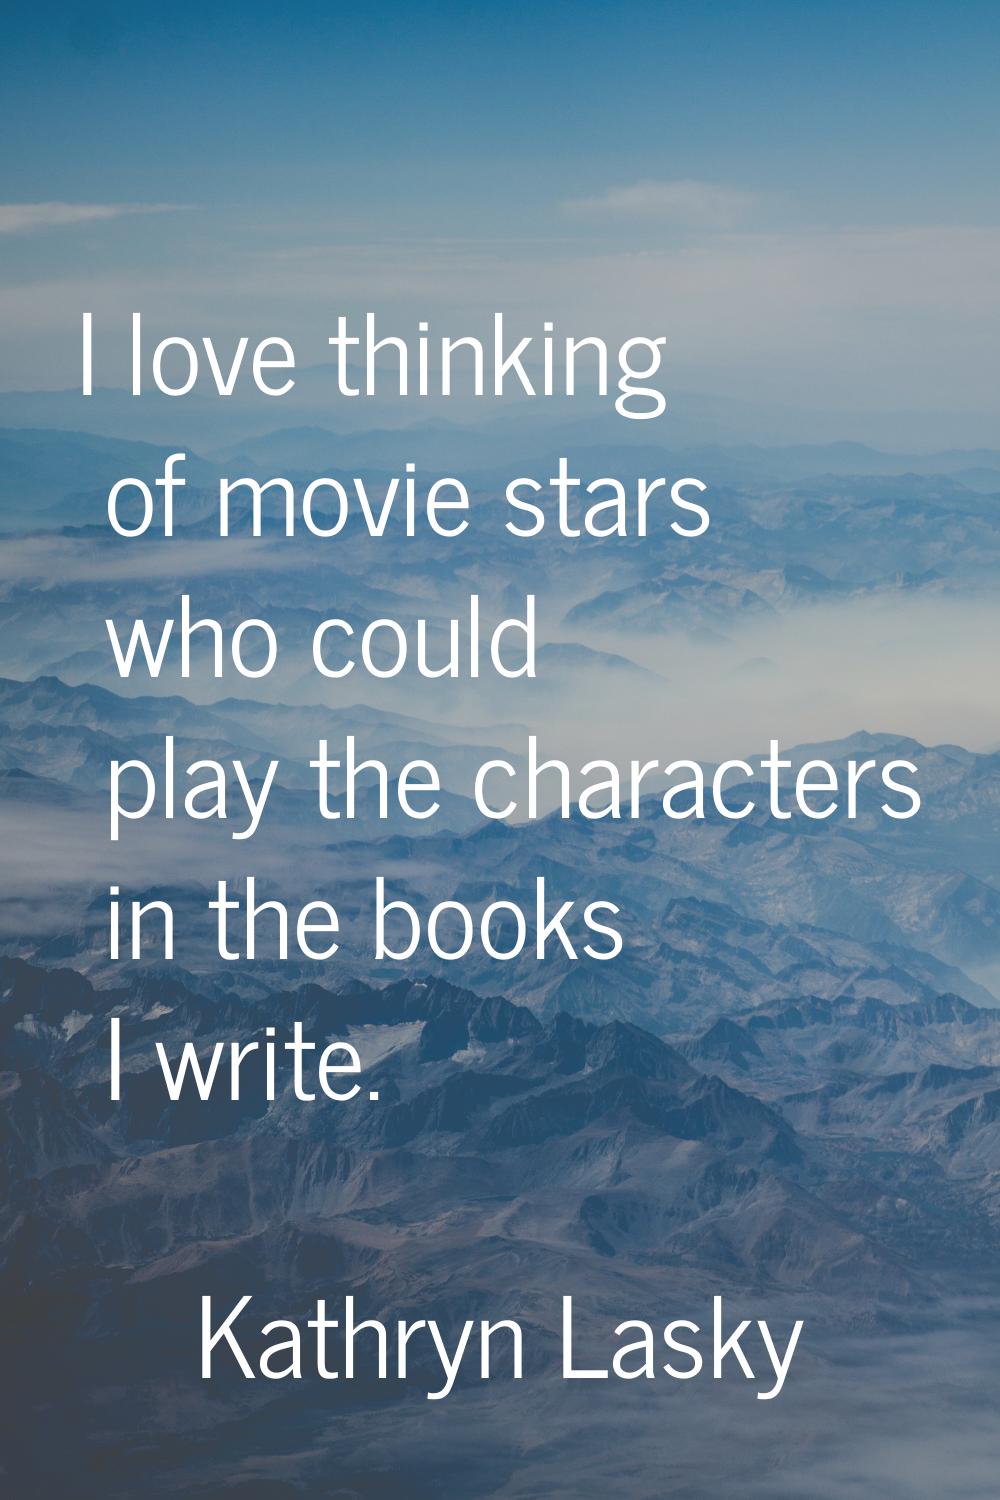 I love thinking of movie stars who could play the characters in the books I write.